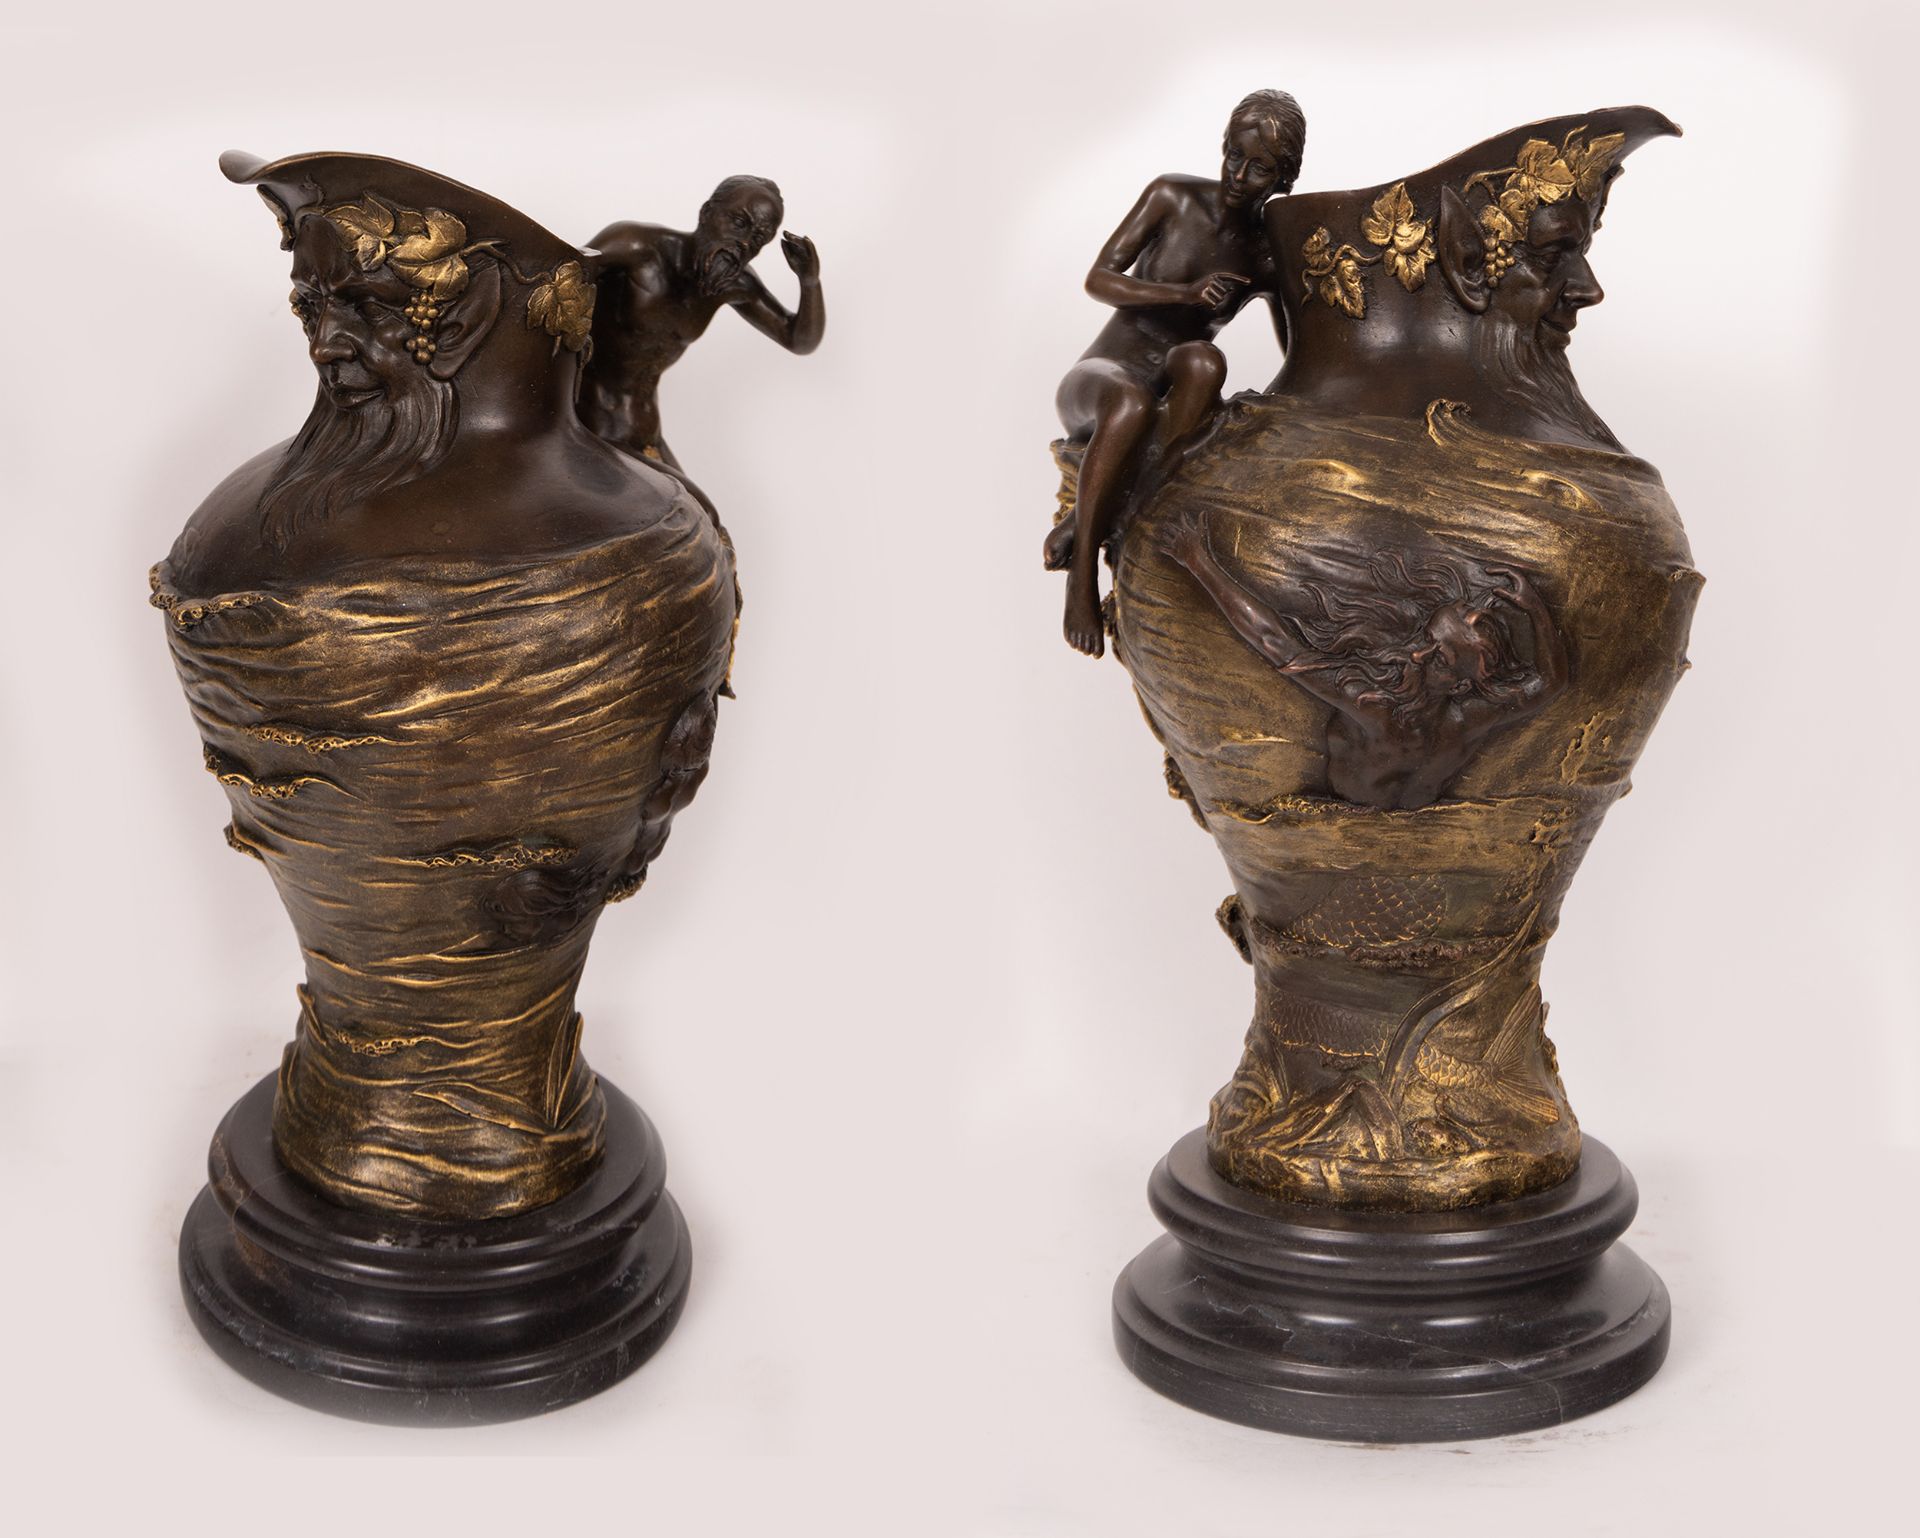 Pair of Cups in Gilt and Patinated Bronze representing Fauns in the Art Nouveau style, French school